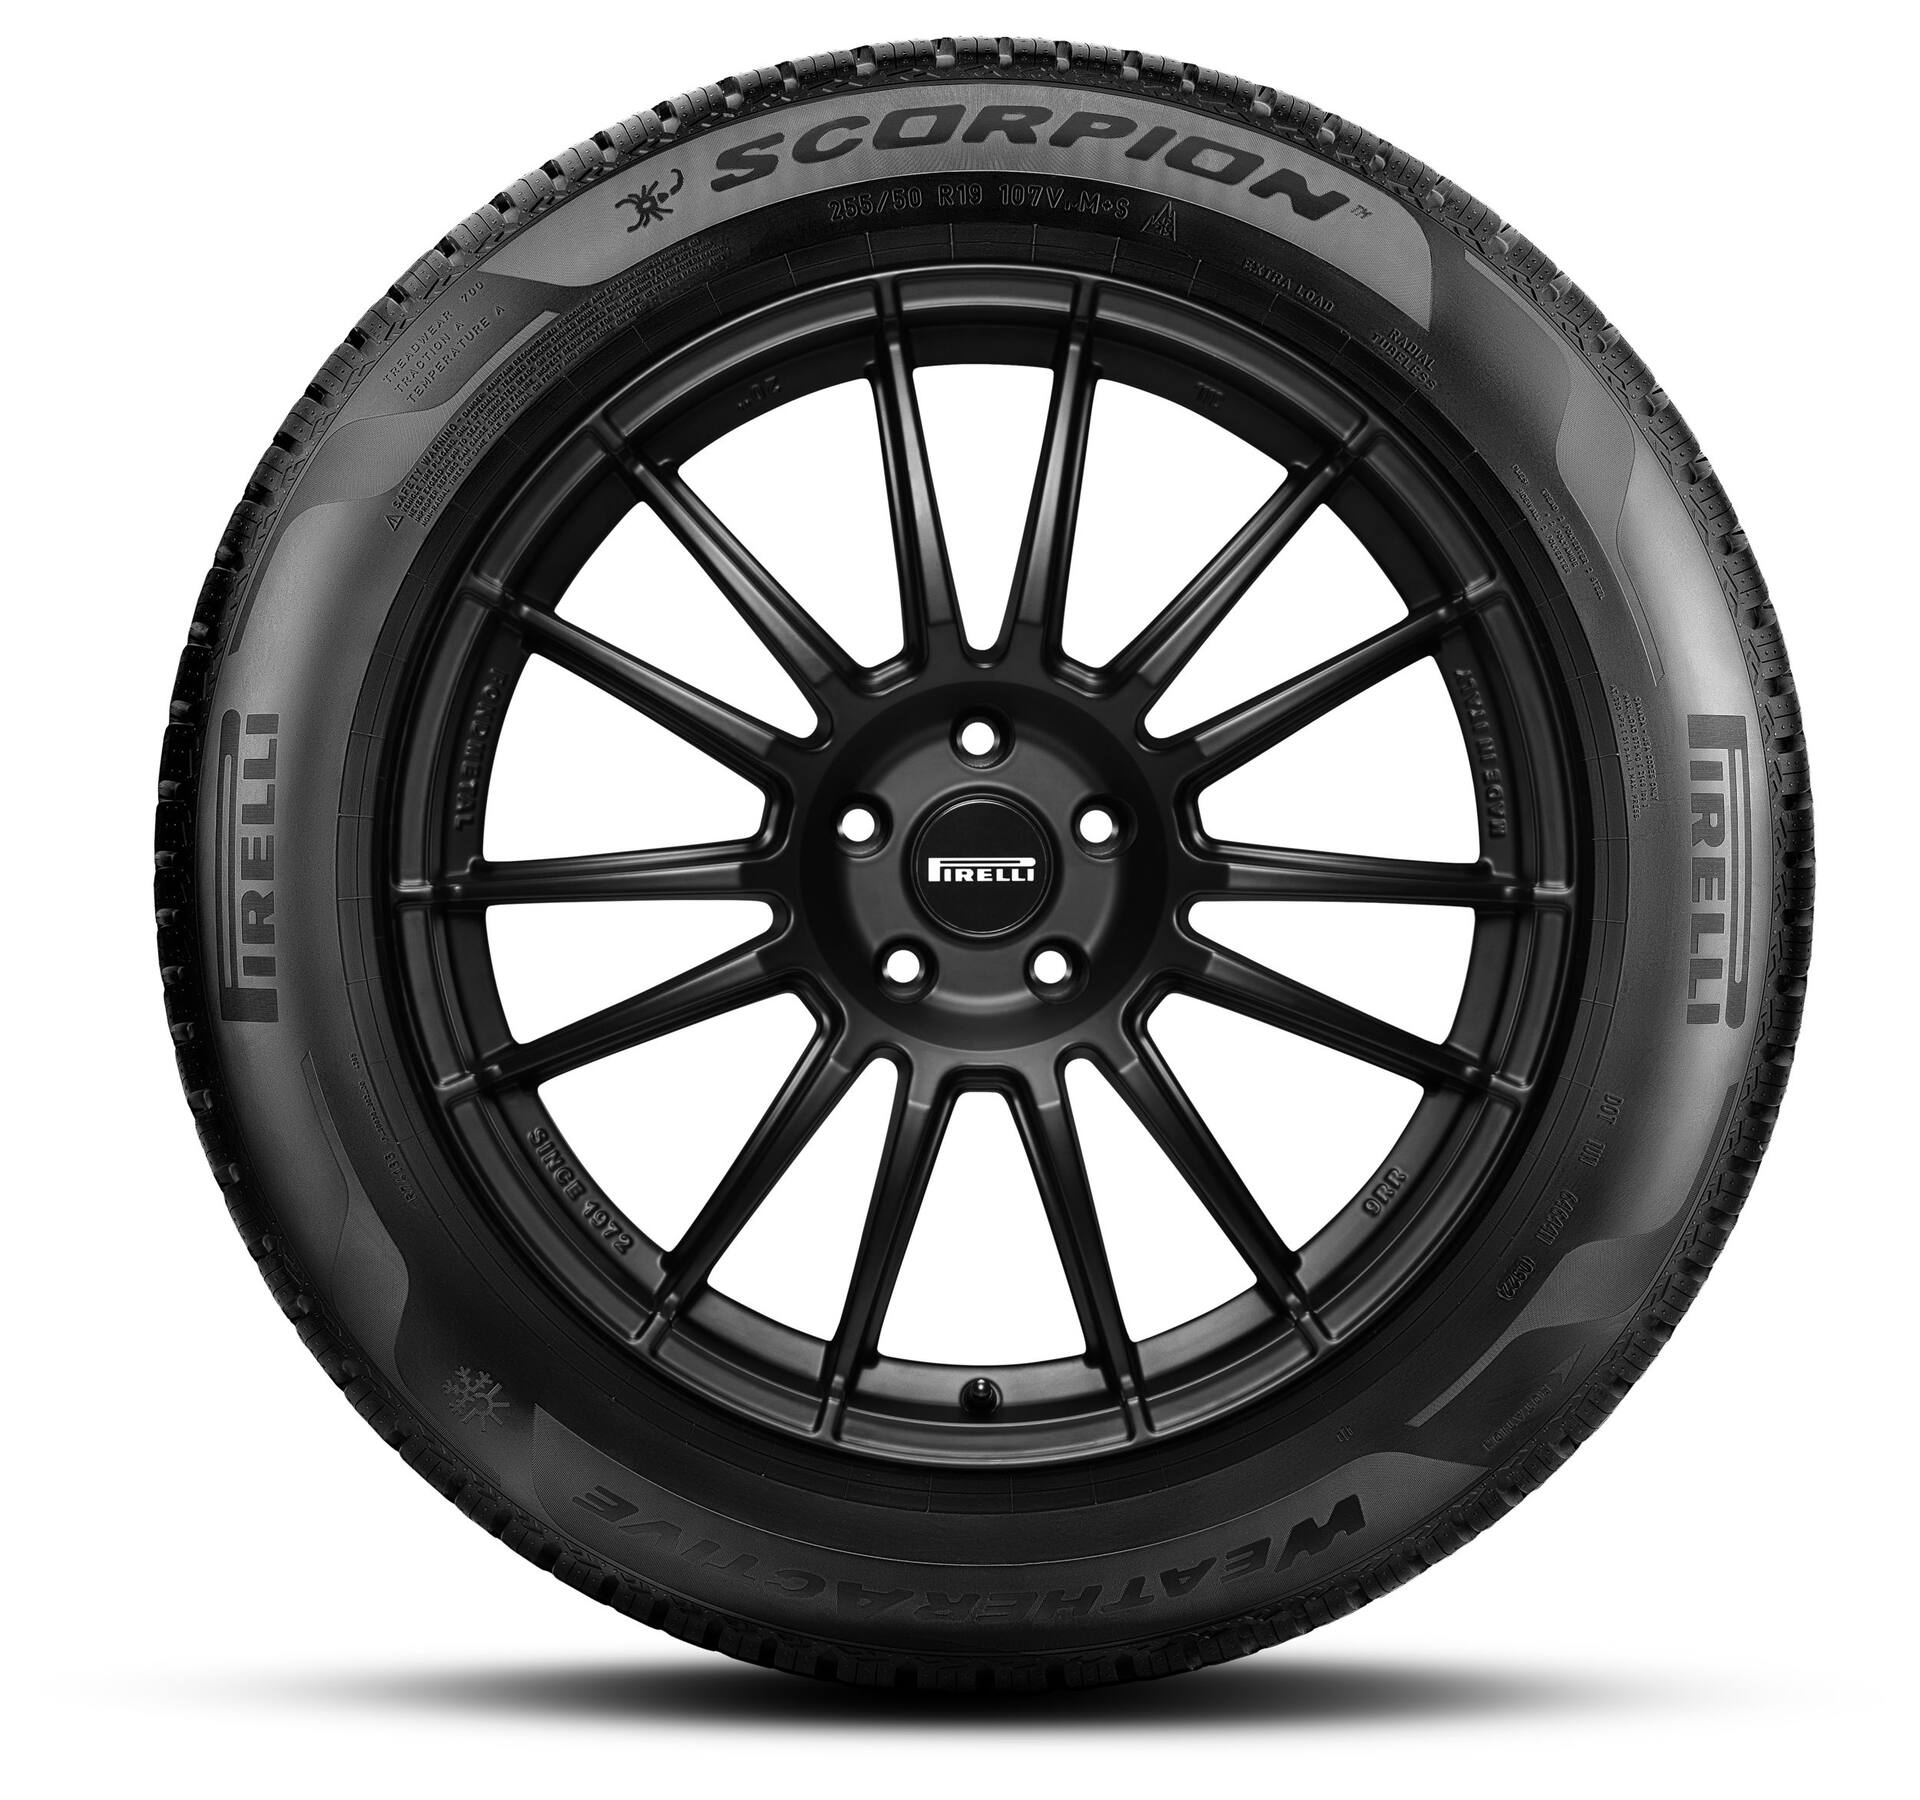 Pirelli Scorpion™ WeatherActive™ All-Weather Tires for Light